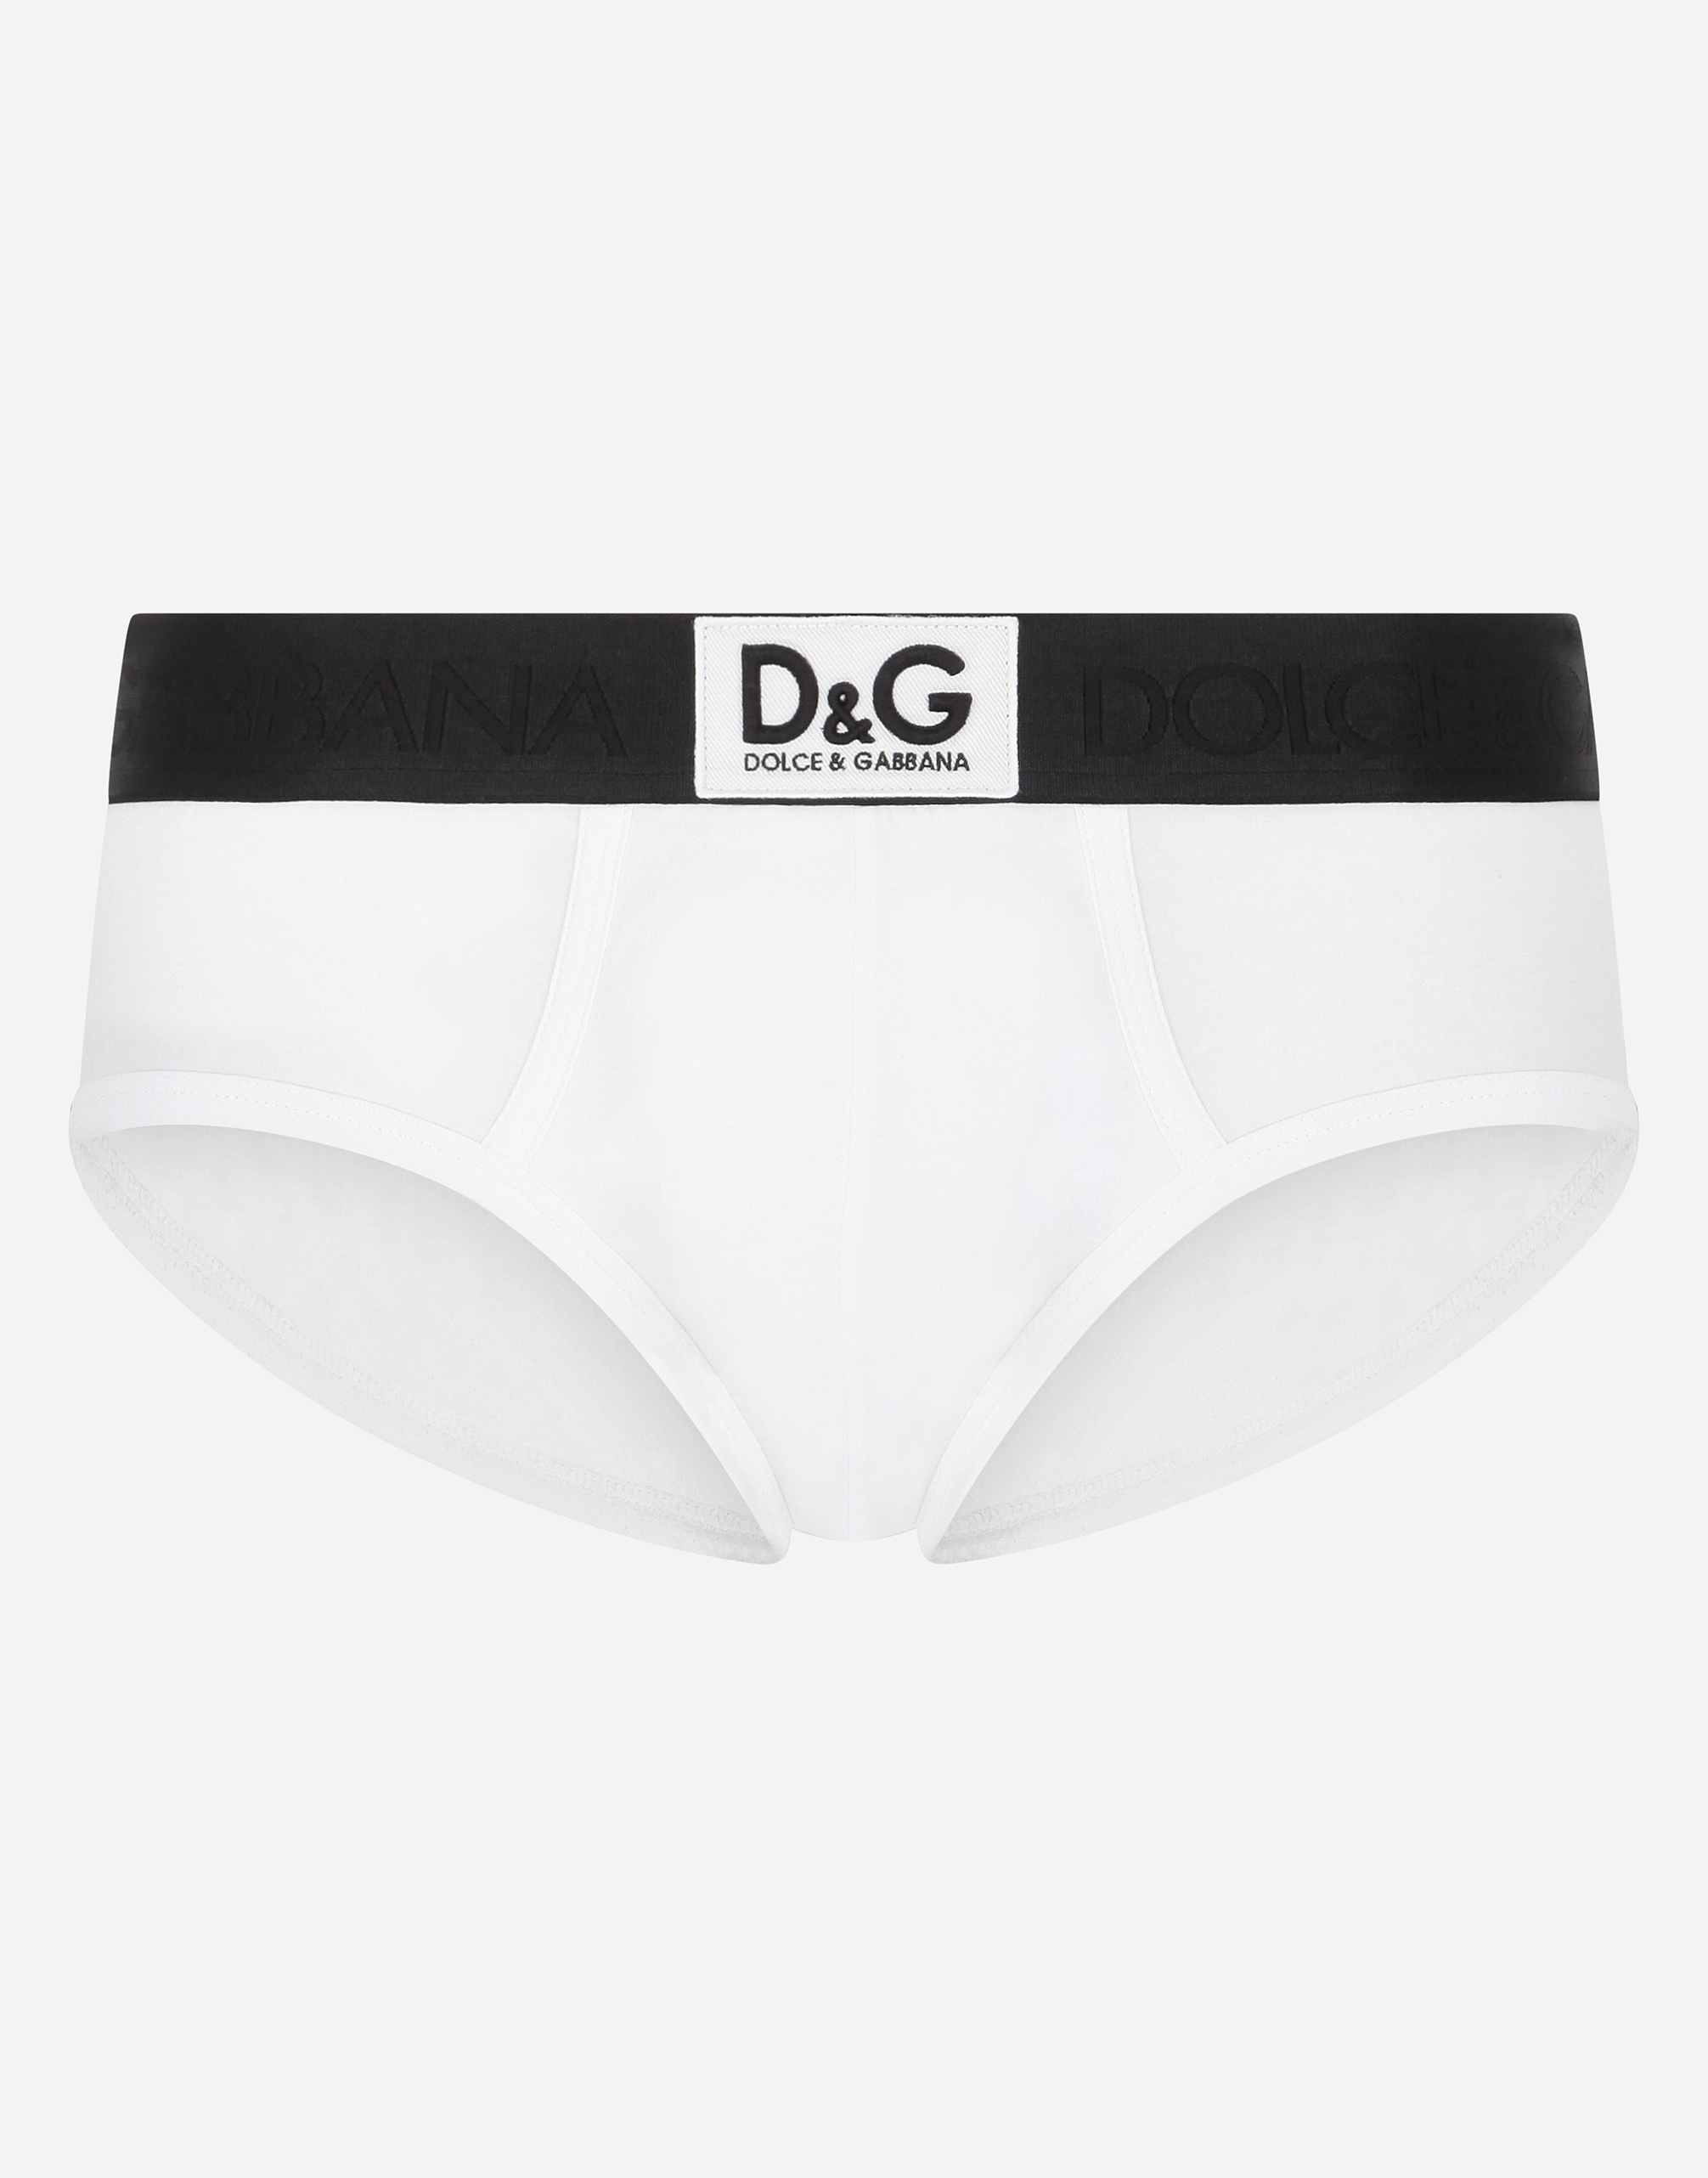 Two-way stretch cotton Brando briefs with DG patch in White